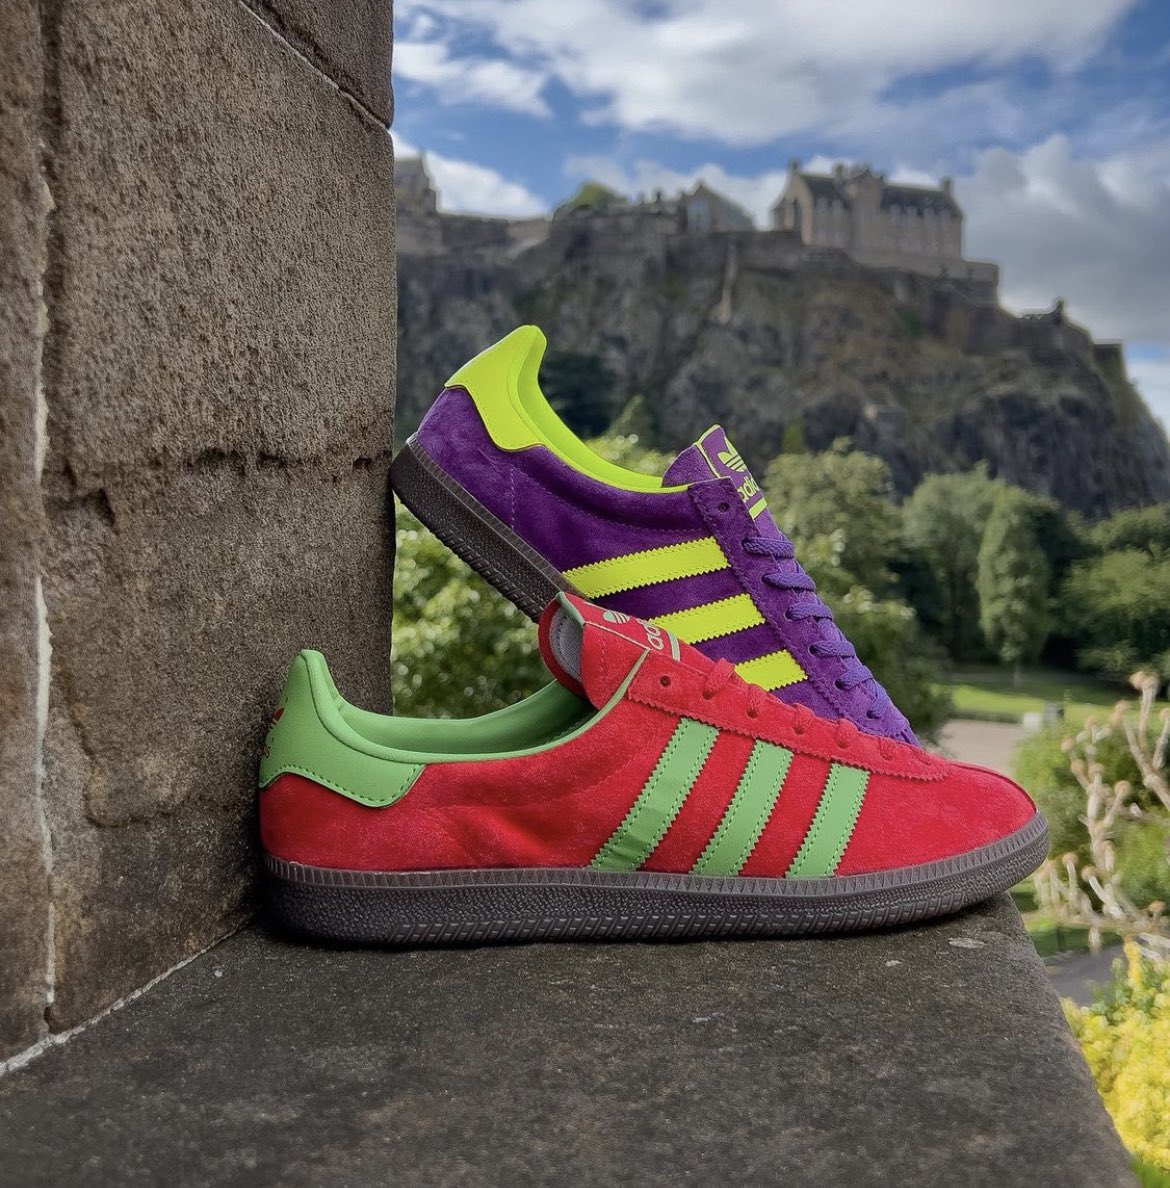 Continuación Melancólico Descubrimiento The Casuals Directory on Twitter: "#Ad 🚨 The second pack of Adidas Athens  “made in Japan” are now online and available here https://t.co/1fte2wHpFw  https://t.co/Qdw7VN9VUt" / Twitter